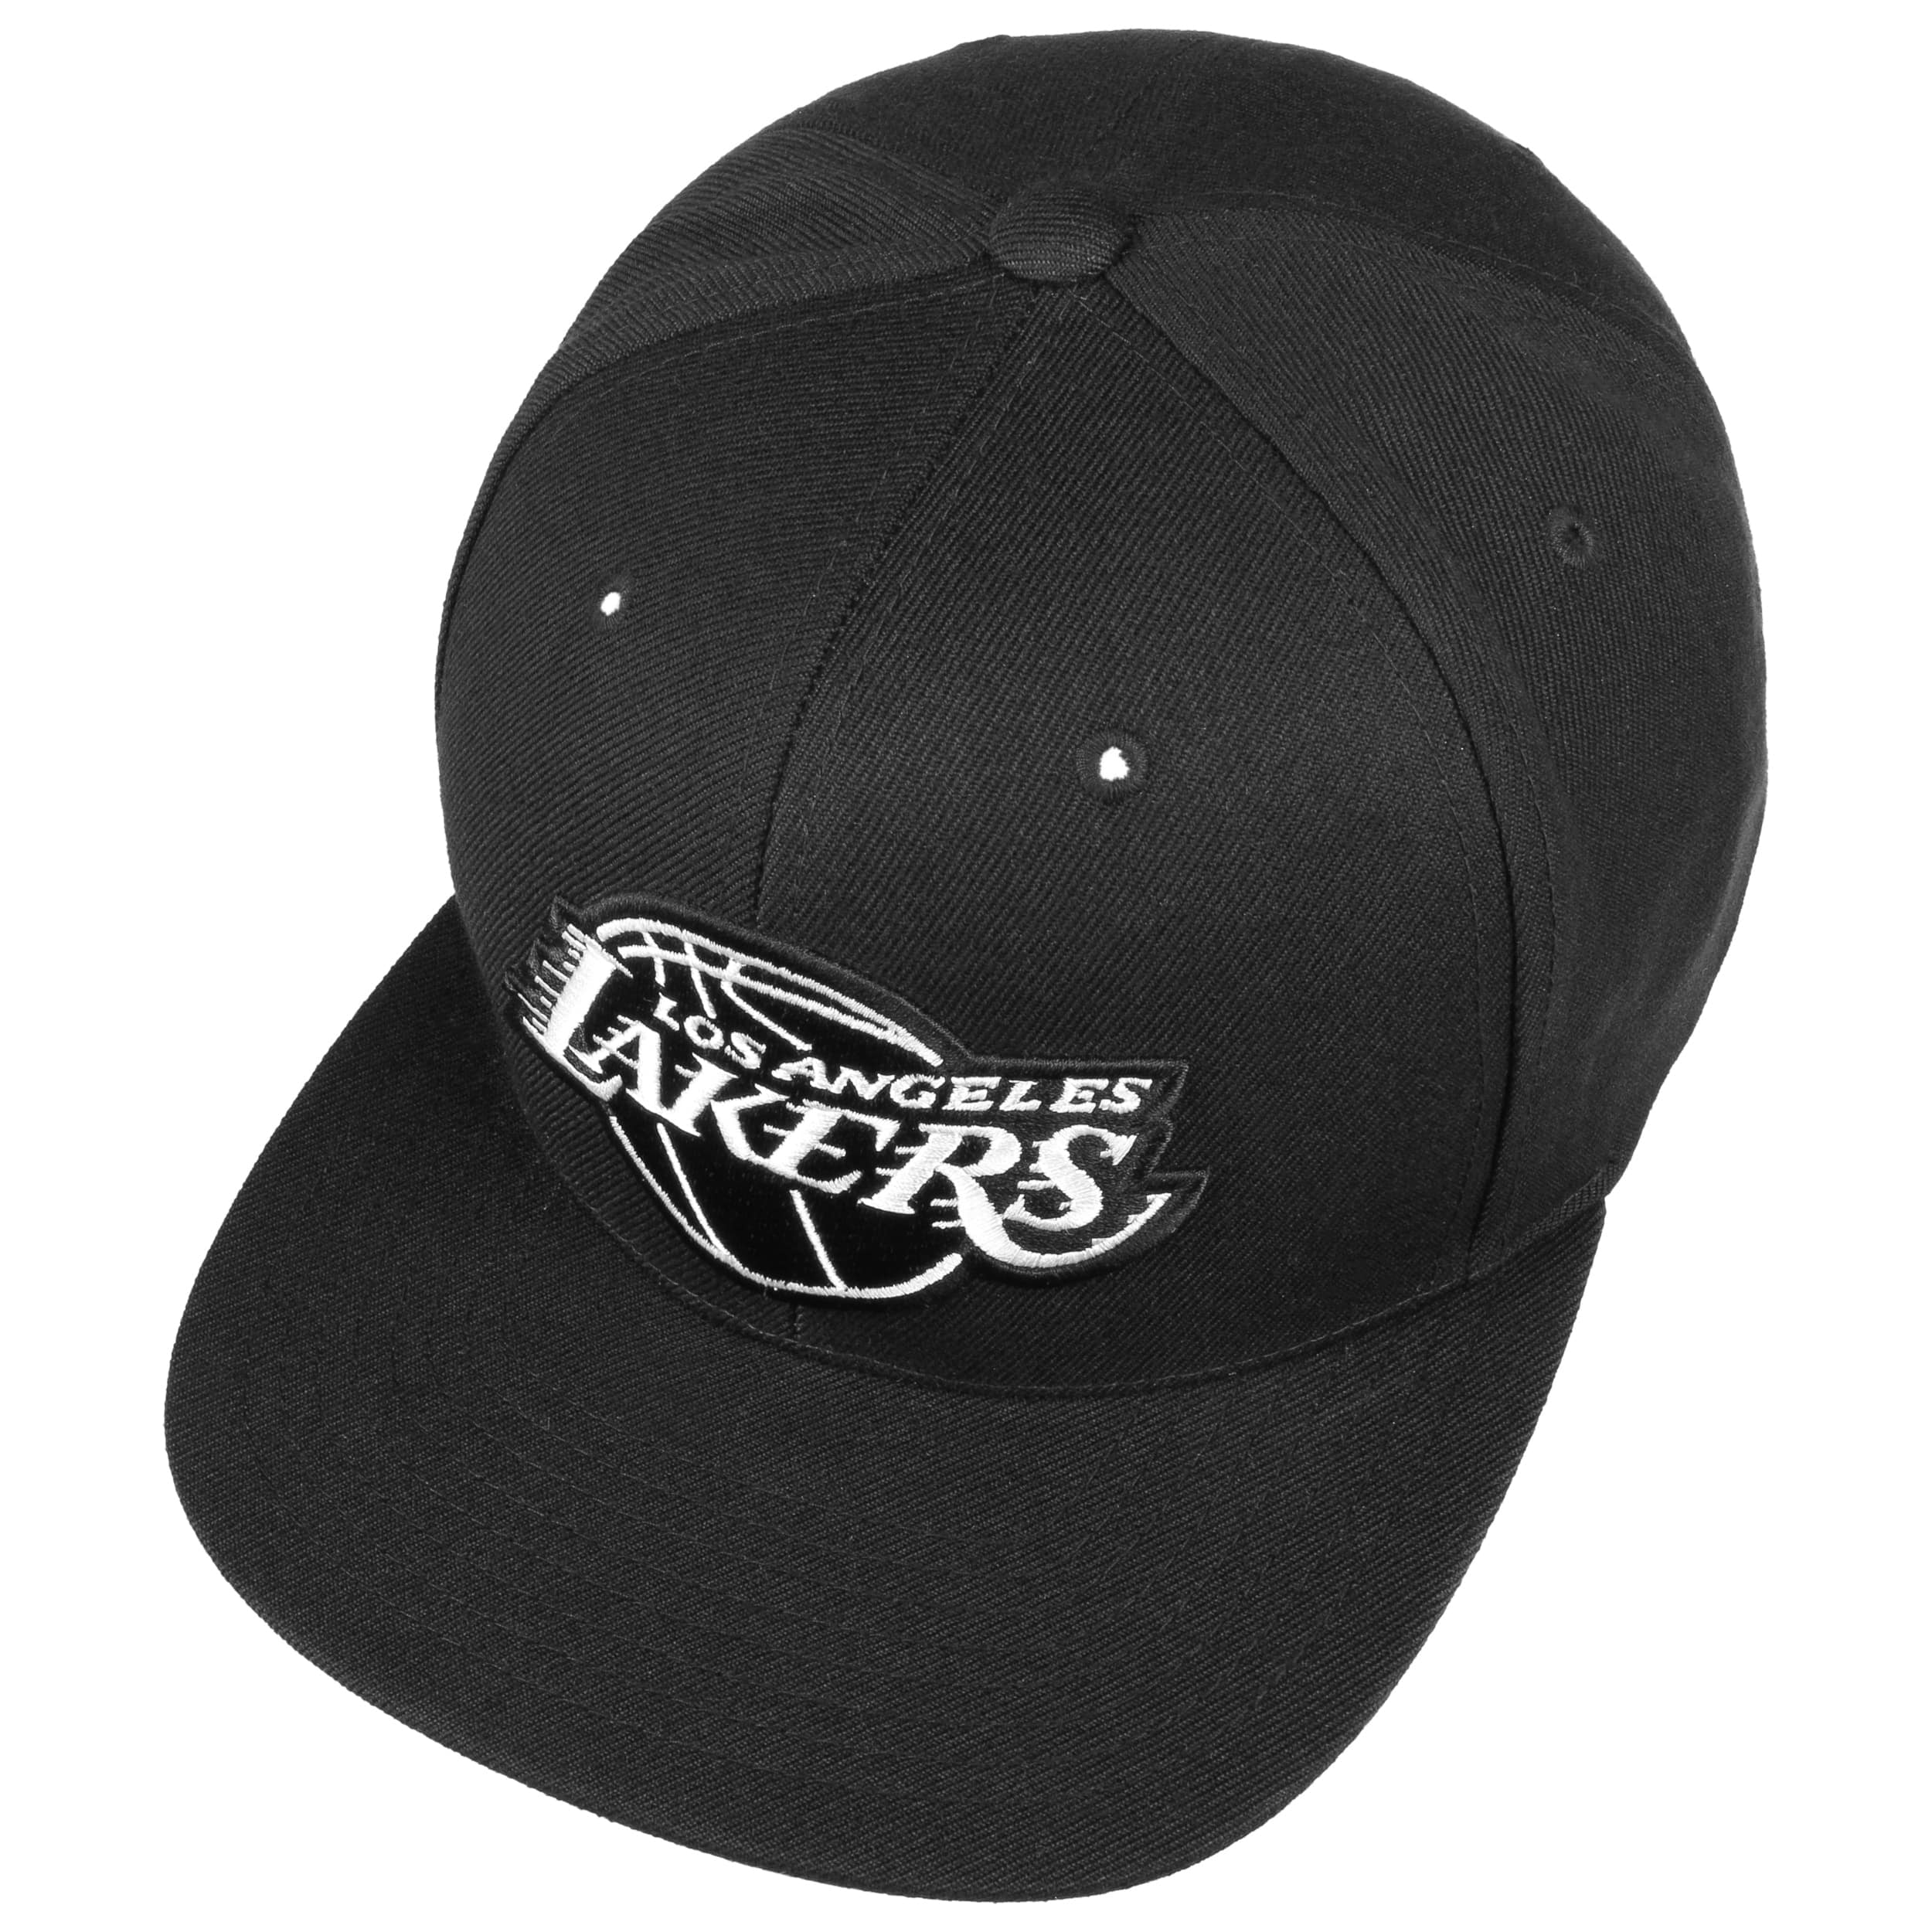 Black and White Lakers Cap by Mitchell & Ness - 29,95